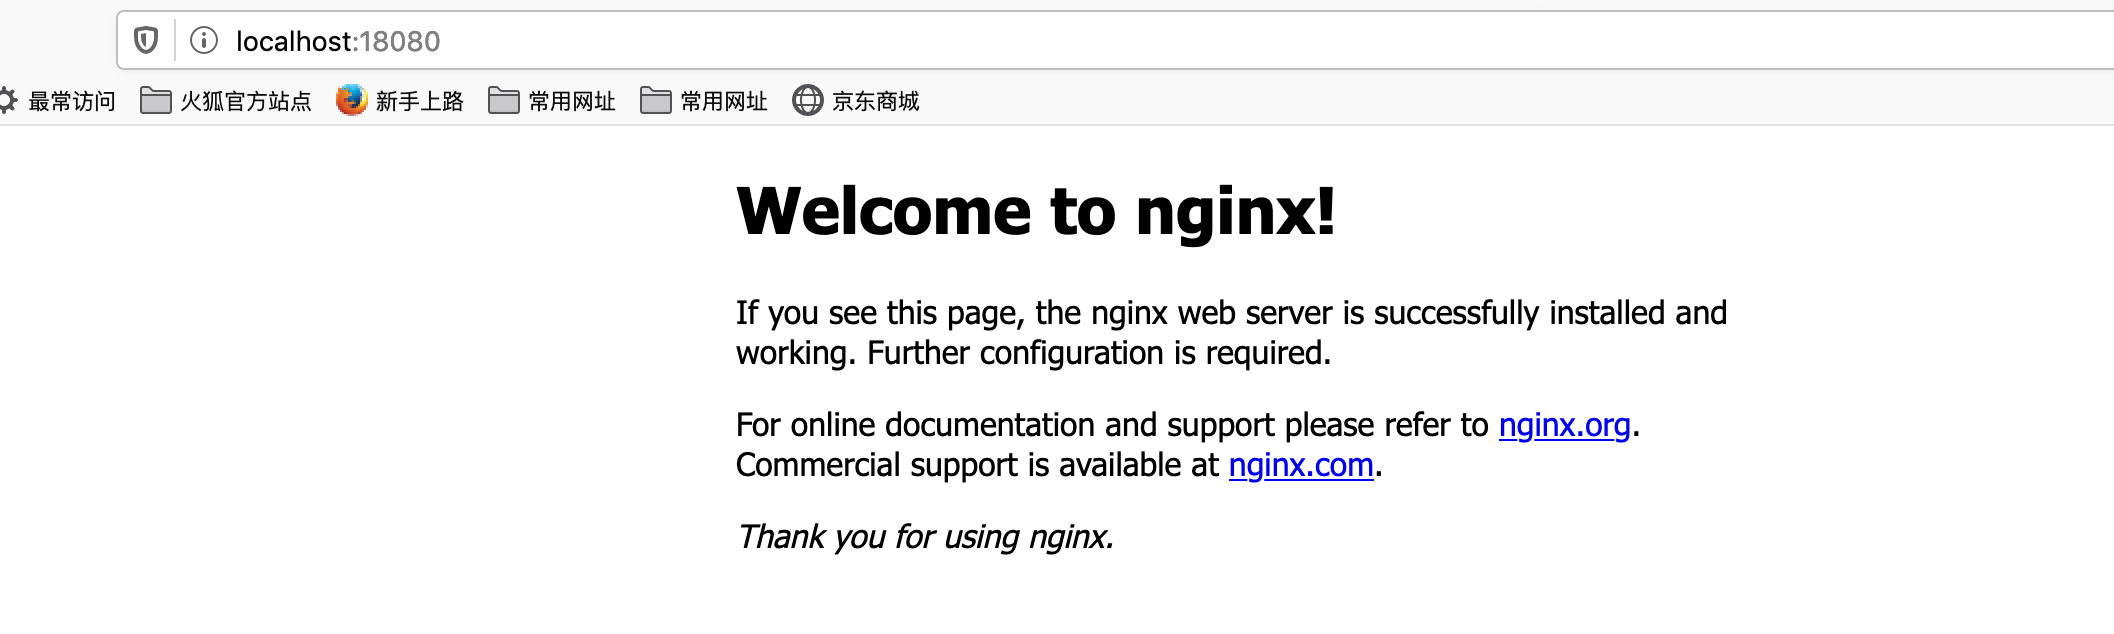 Nginx/1.18.0. Localhost Welcome to nginx.